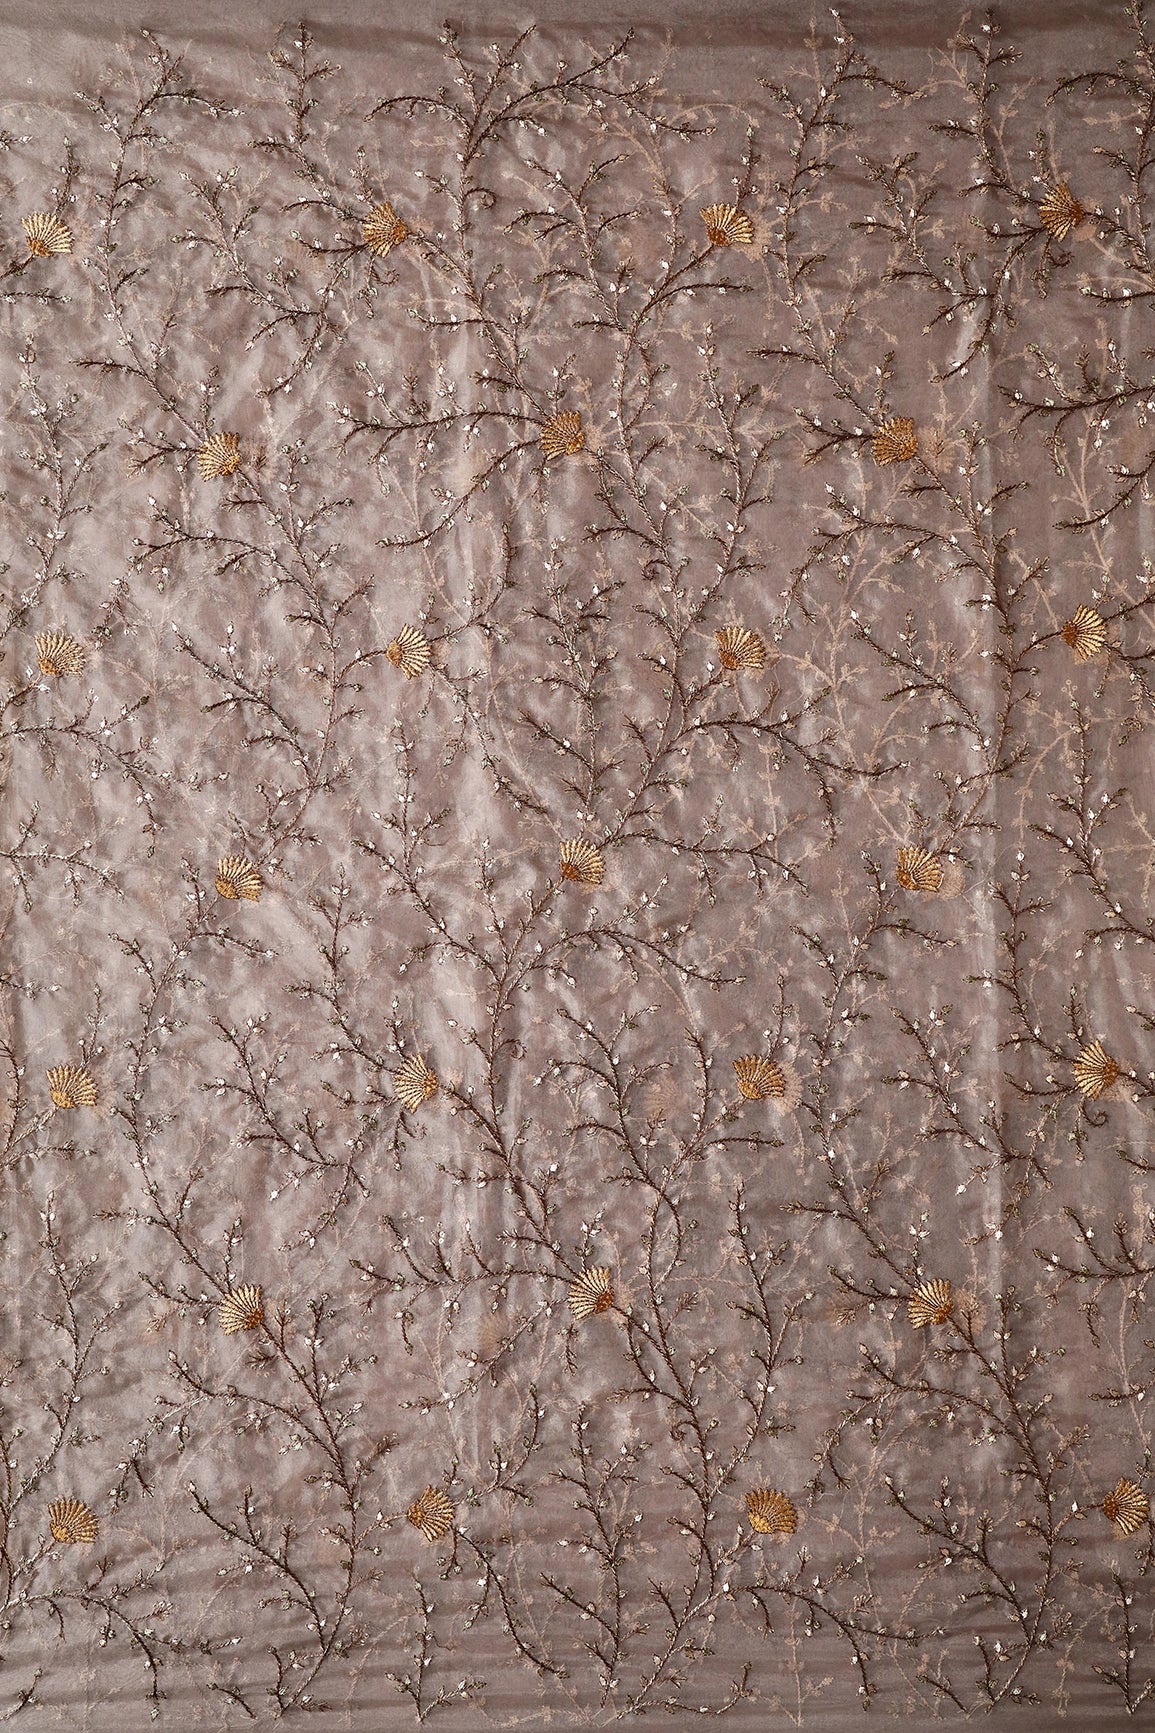 1 Meter Cut Piece Of Brown And Cream Thread With Gold Sequins Leafy Embroidery On Light Brown Organza Fabric